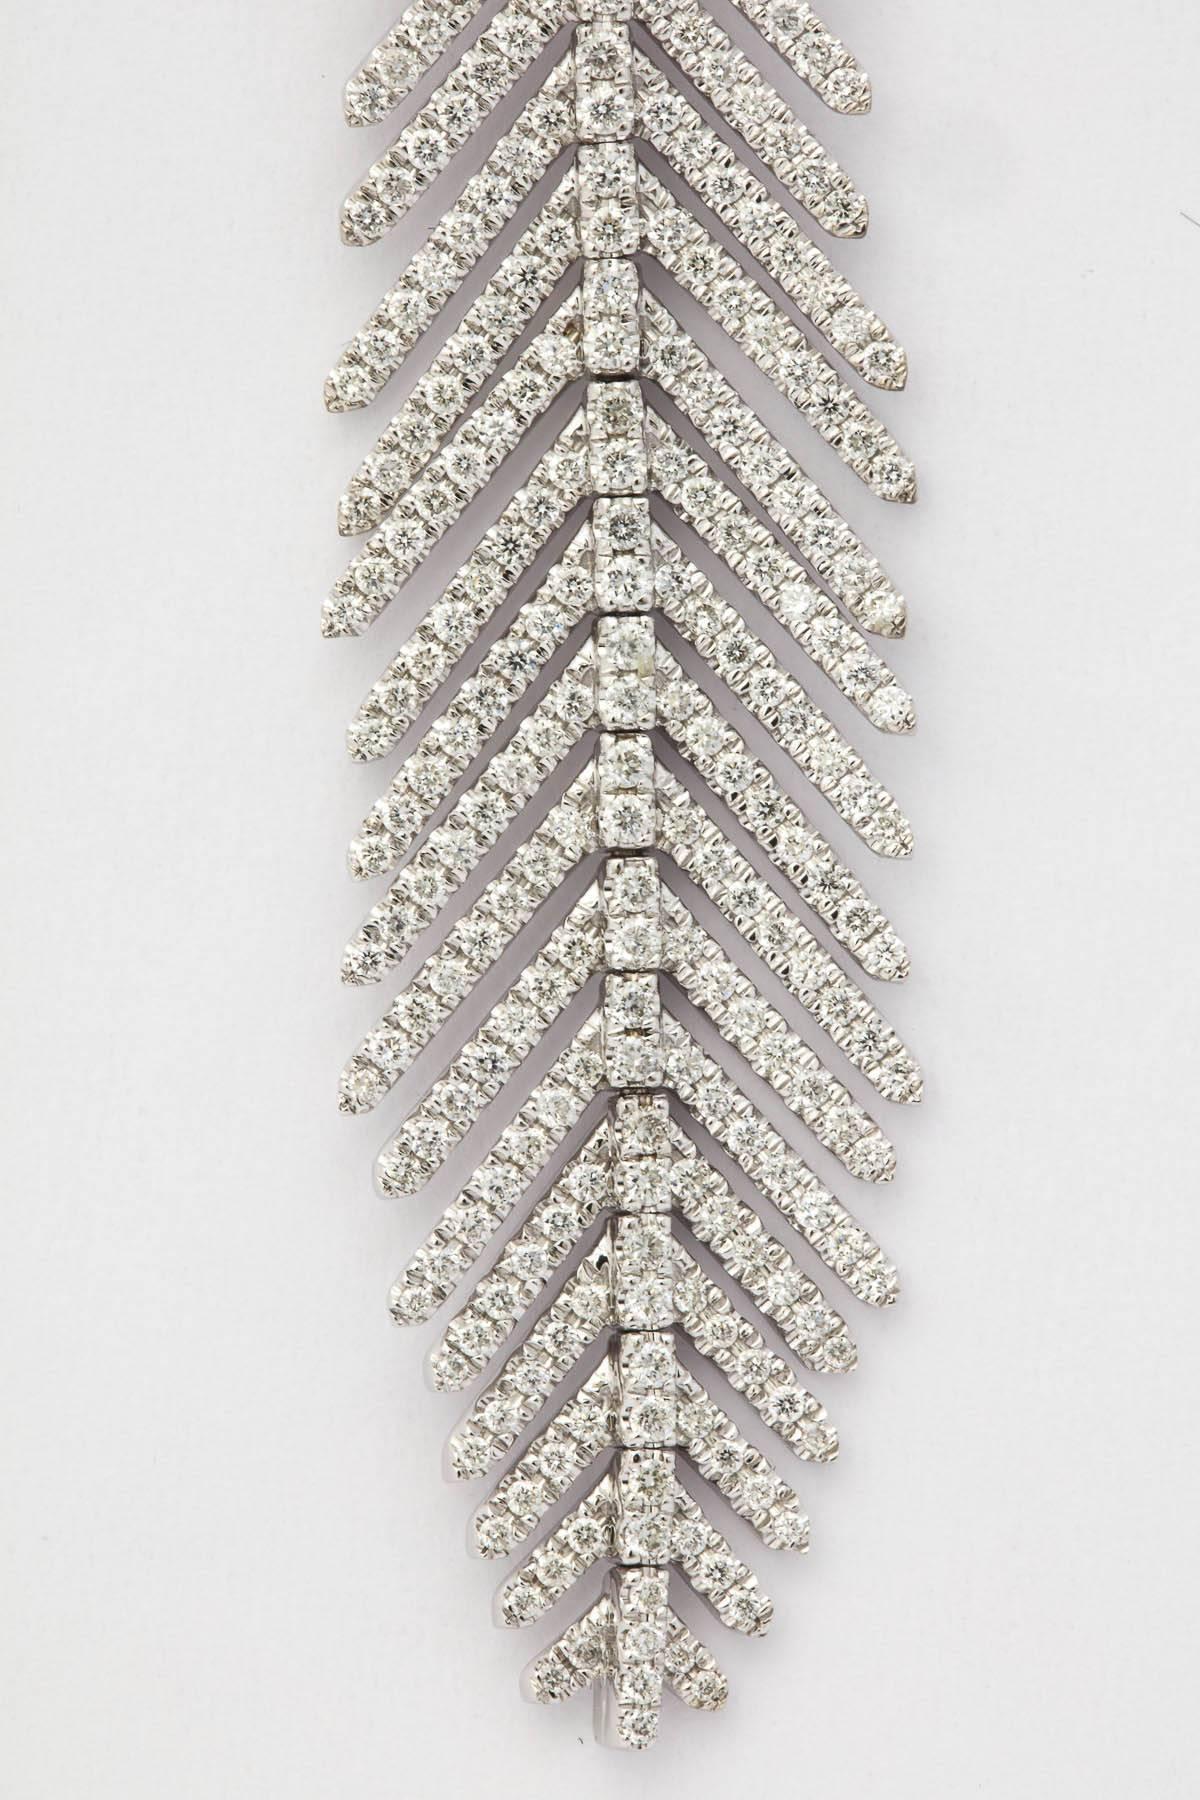 18k white gold and diamond flexible feather earrings measuring 3 inches
 in length. Each section moves independently creating a sensual feel. The earring is set with 562 full cut diamonds weighing almost 3.00 ct.